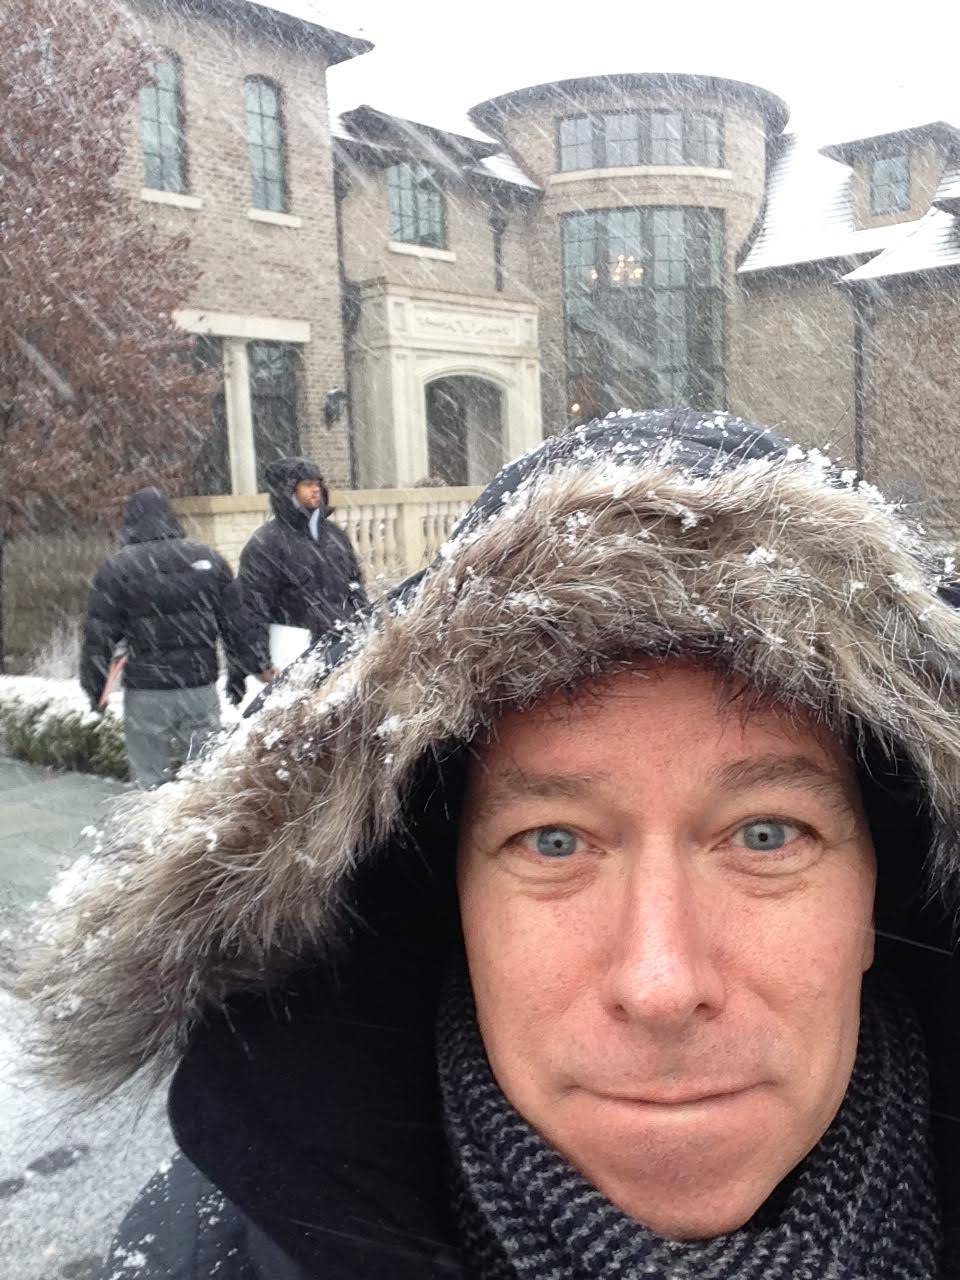 Freezing my ass off filming at Lucious’s mansion outside Chicago.